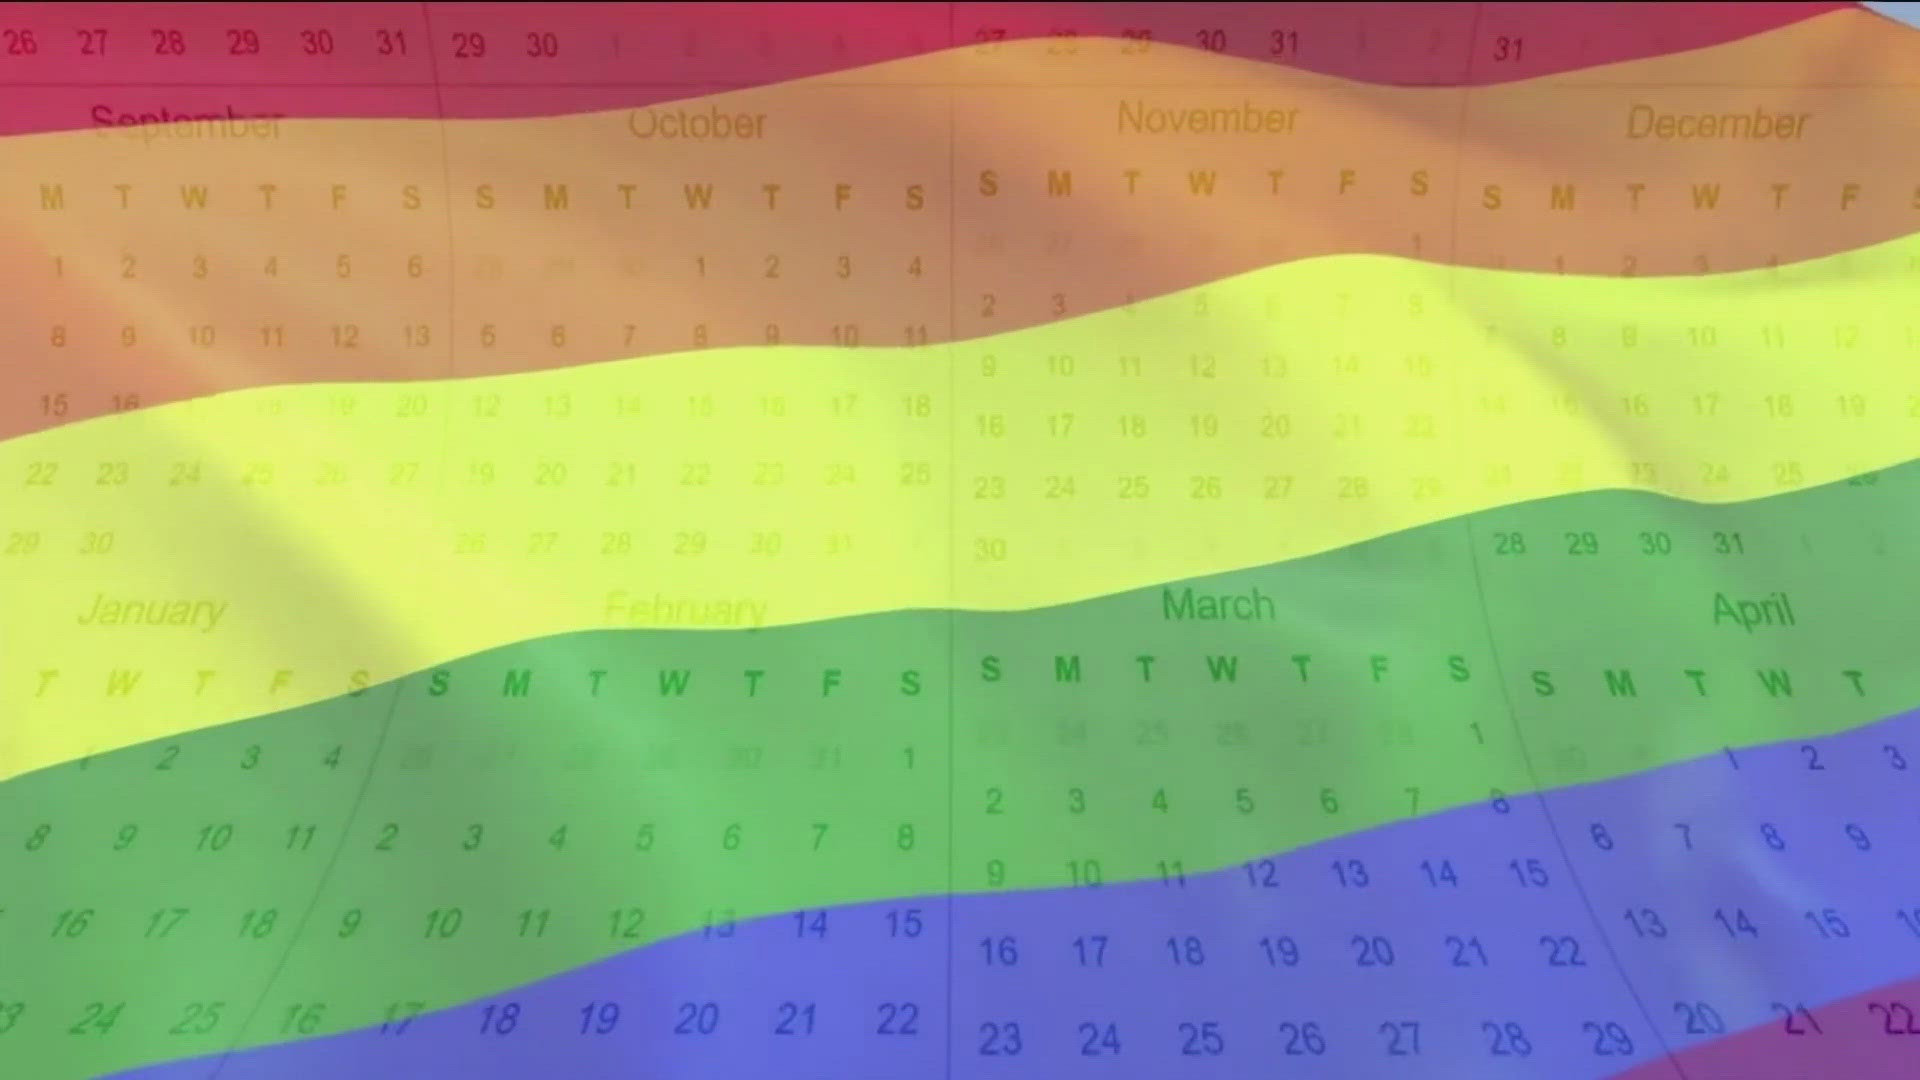 As part of KVUE's special coverage of Pride Month, Bob Buckalew presents a timeline of some significant dates in the journey toward equality.